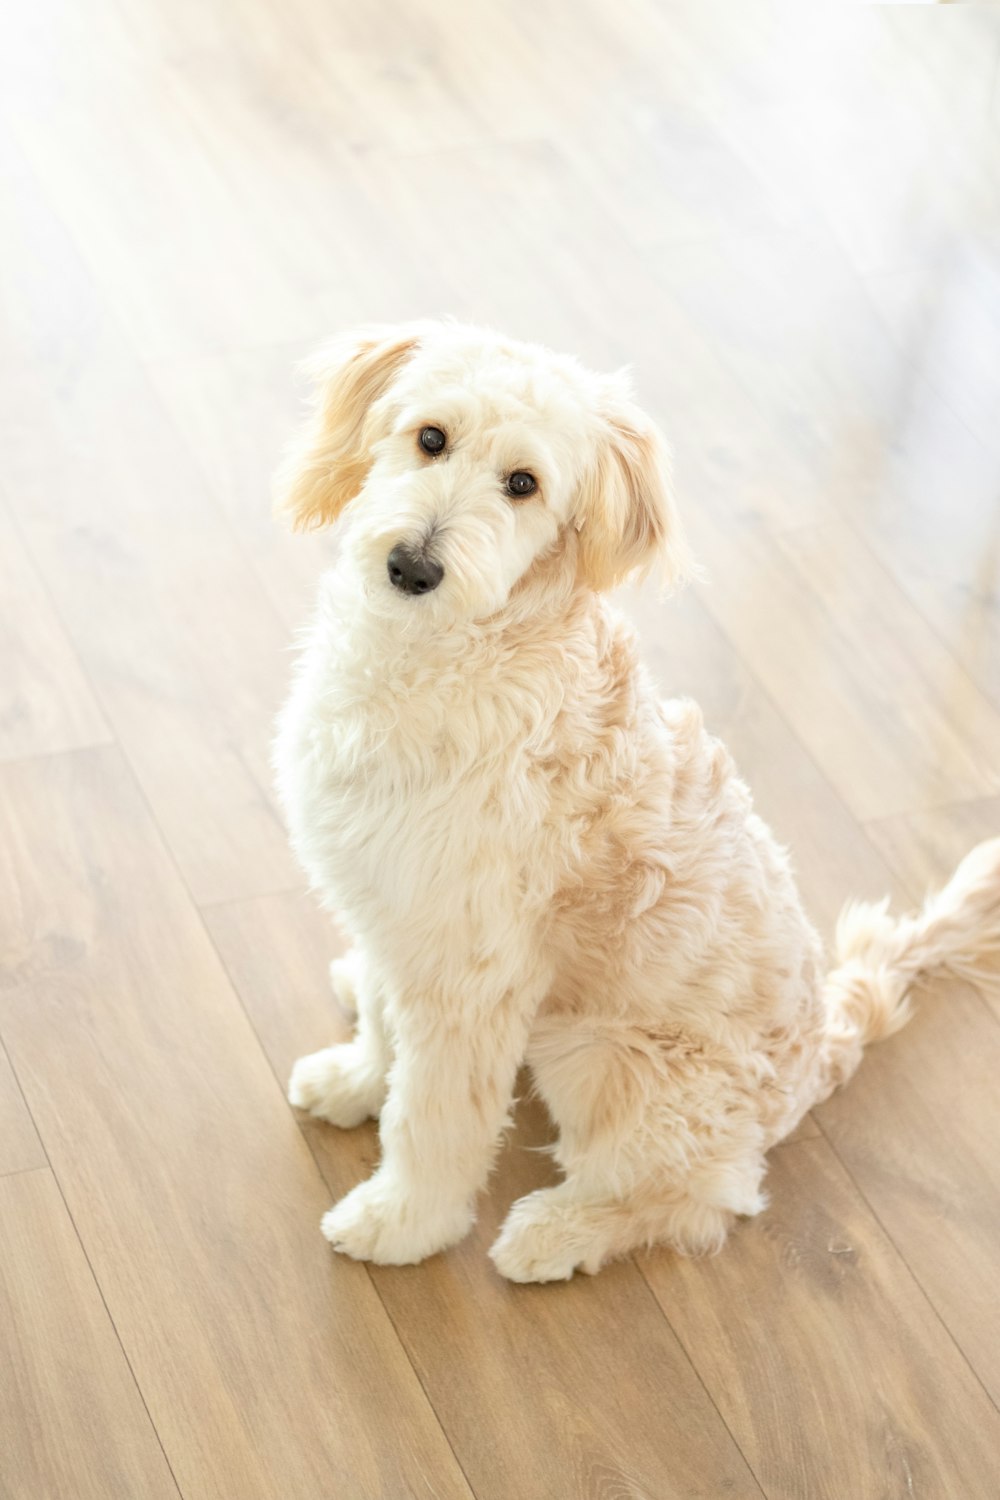 a small white dog sitting on top of a wooden floor